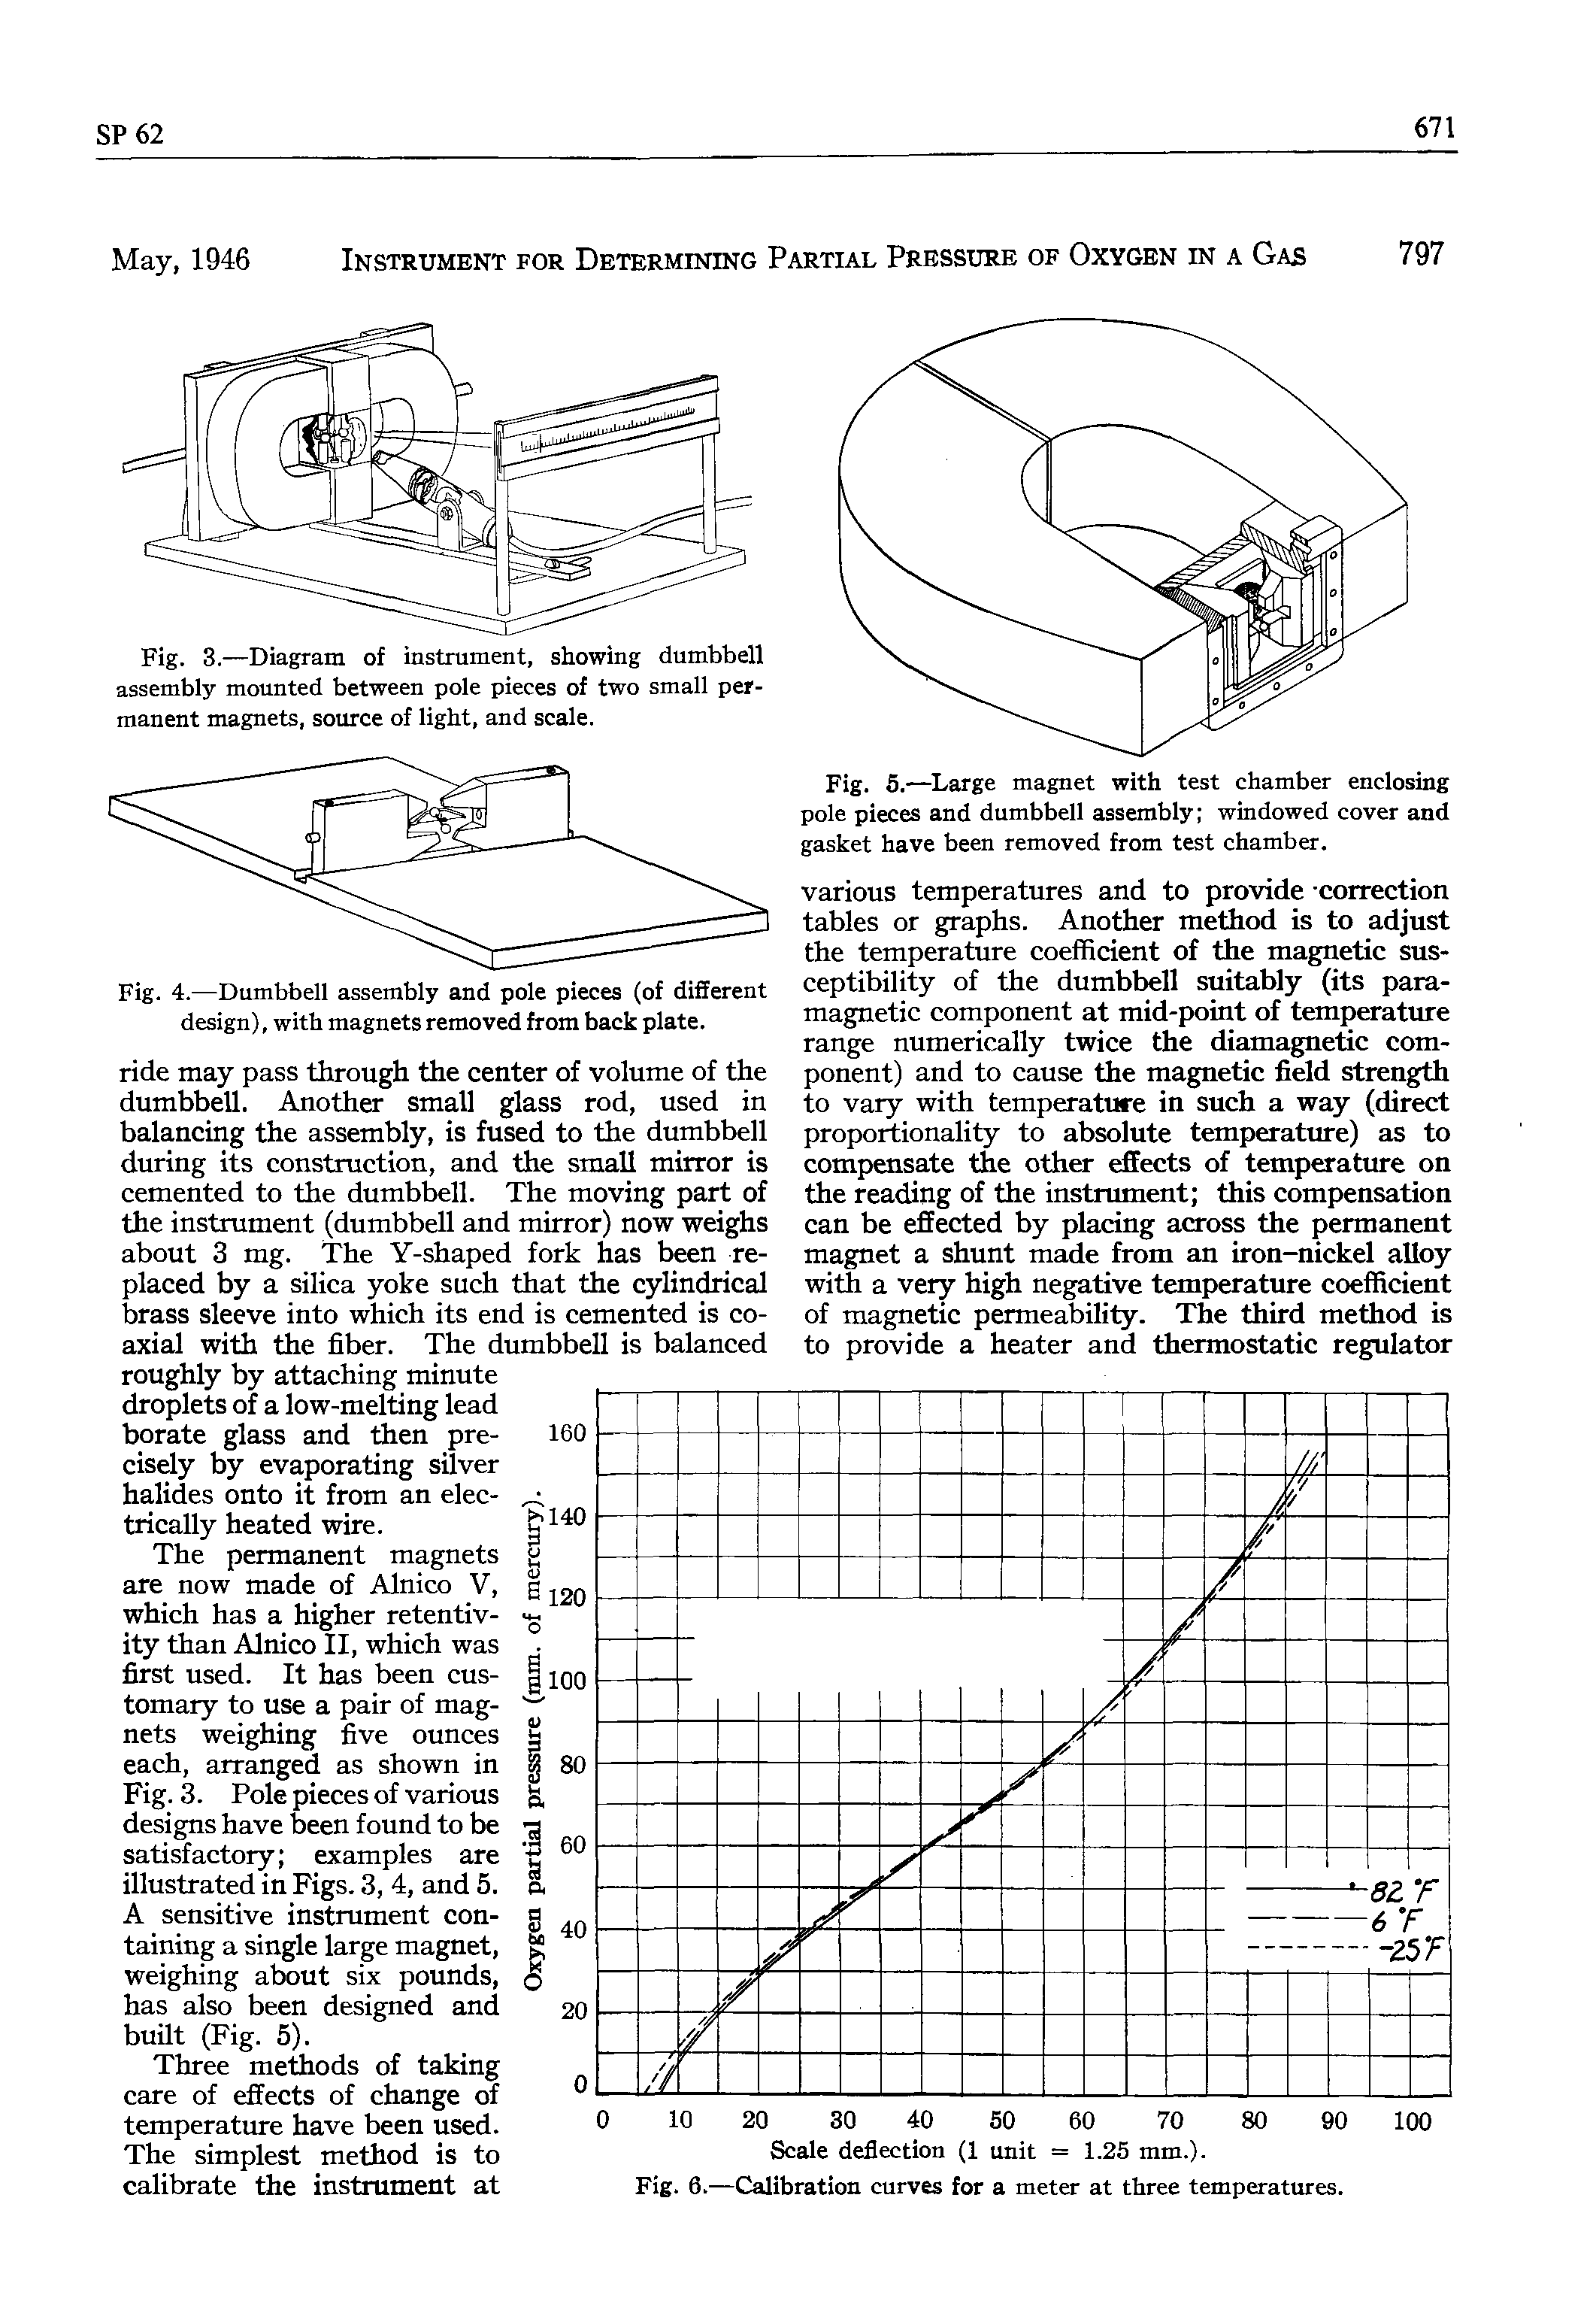 Fig. 6.—Large magnet with test chamber enclosing pole pieces and dumbbell assembly windowed cover and gasket have been removed from test chamber.